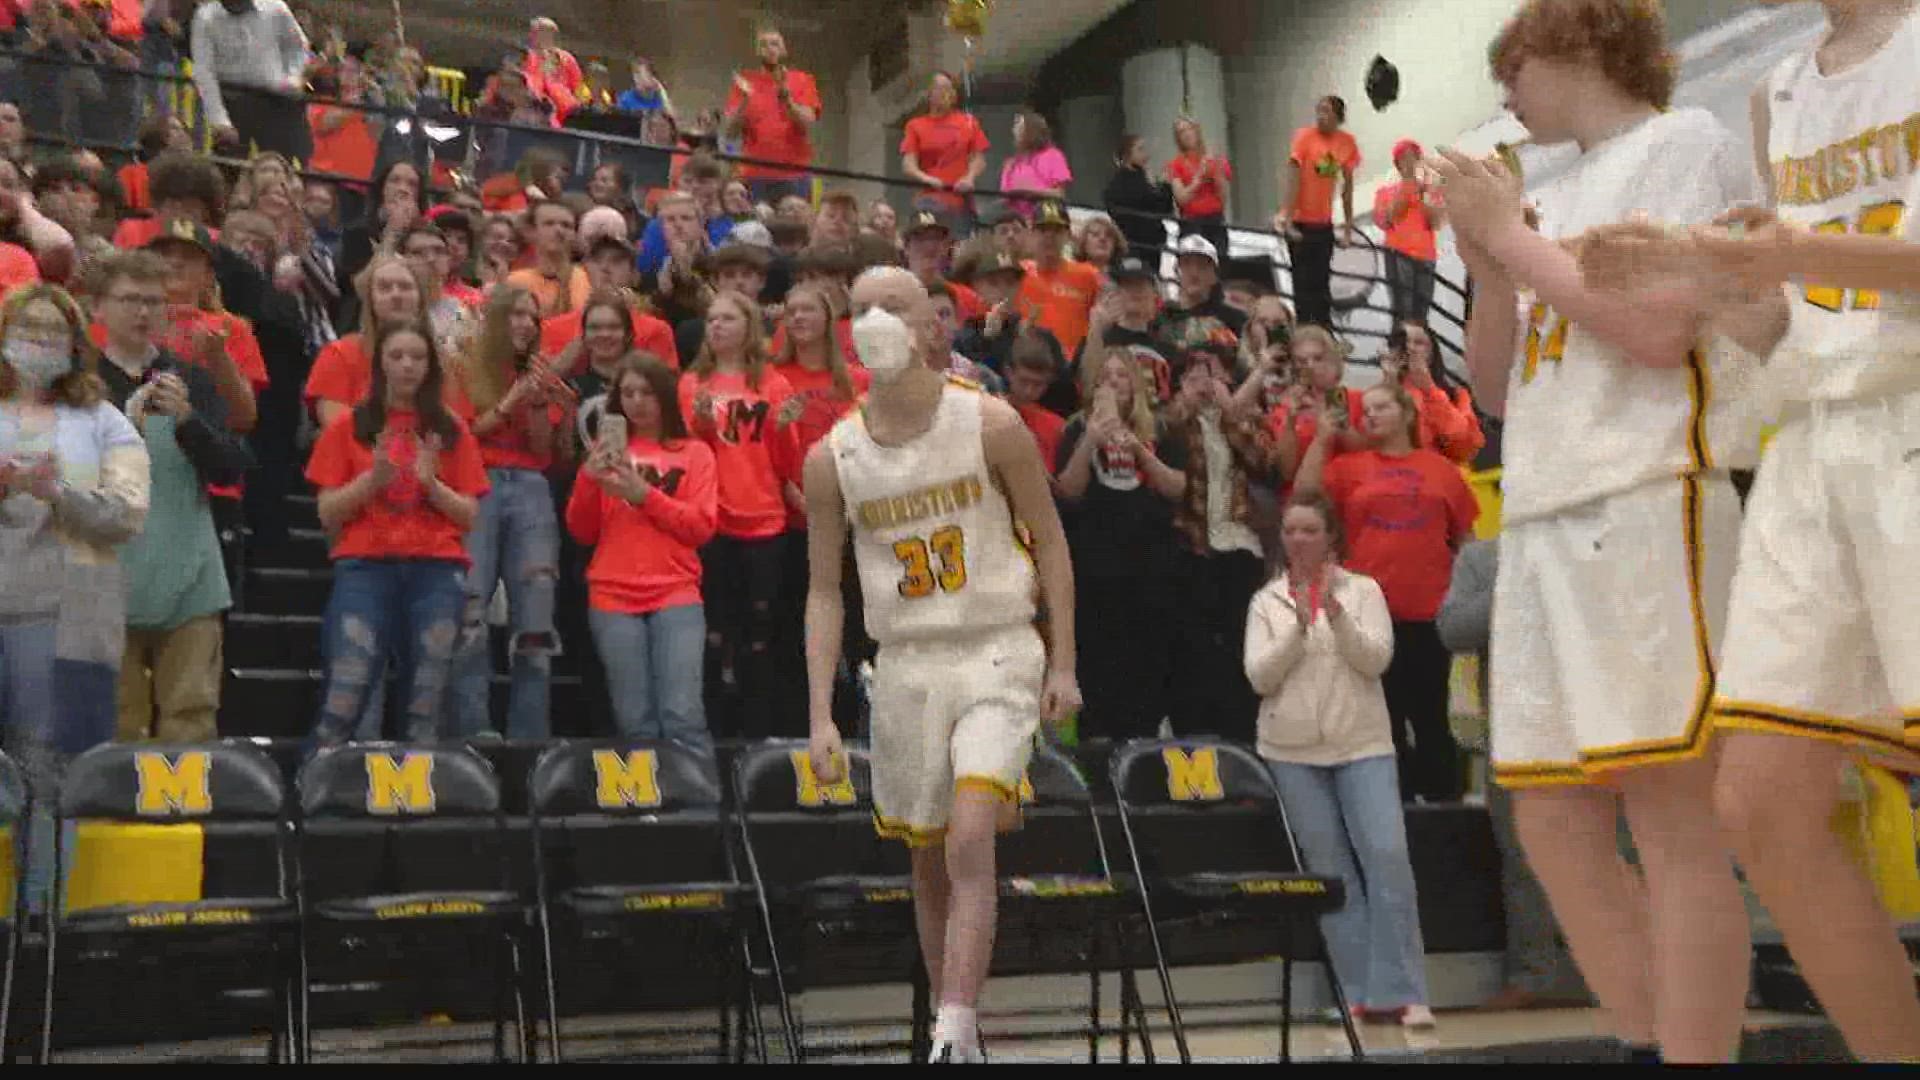 His cancer in remission, Batton was back on the court Friday for a very special homecoming.